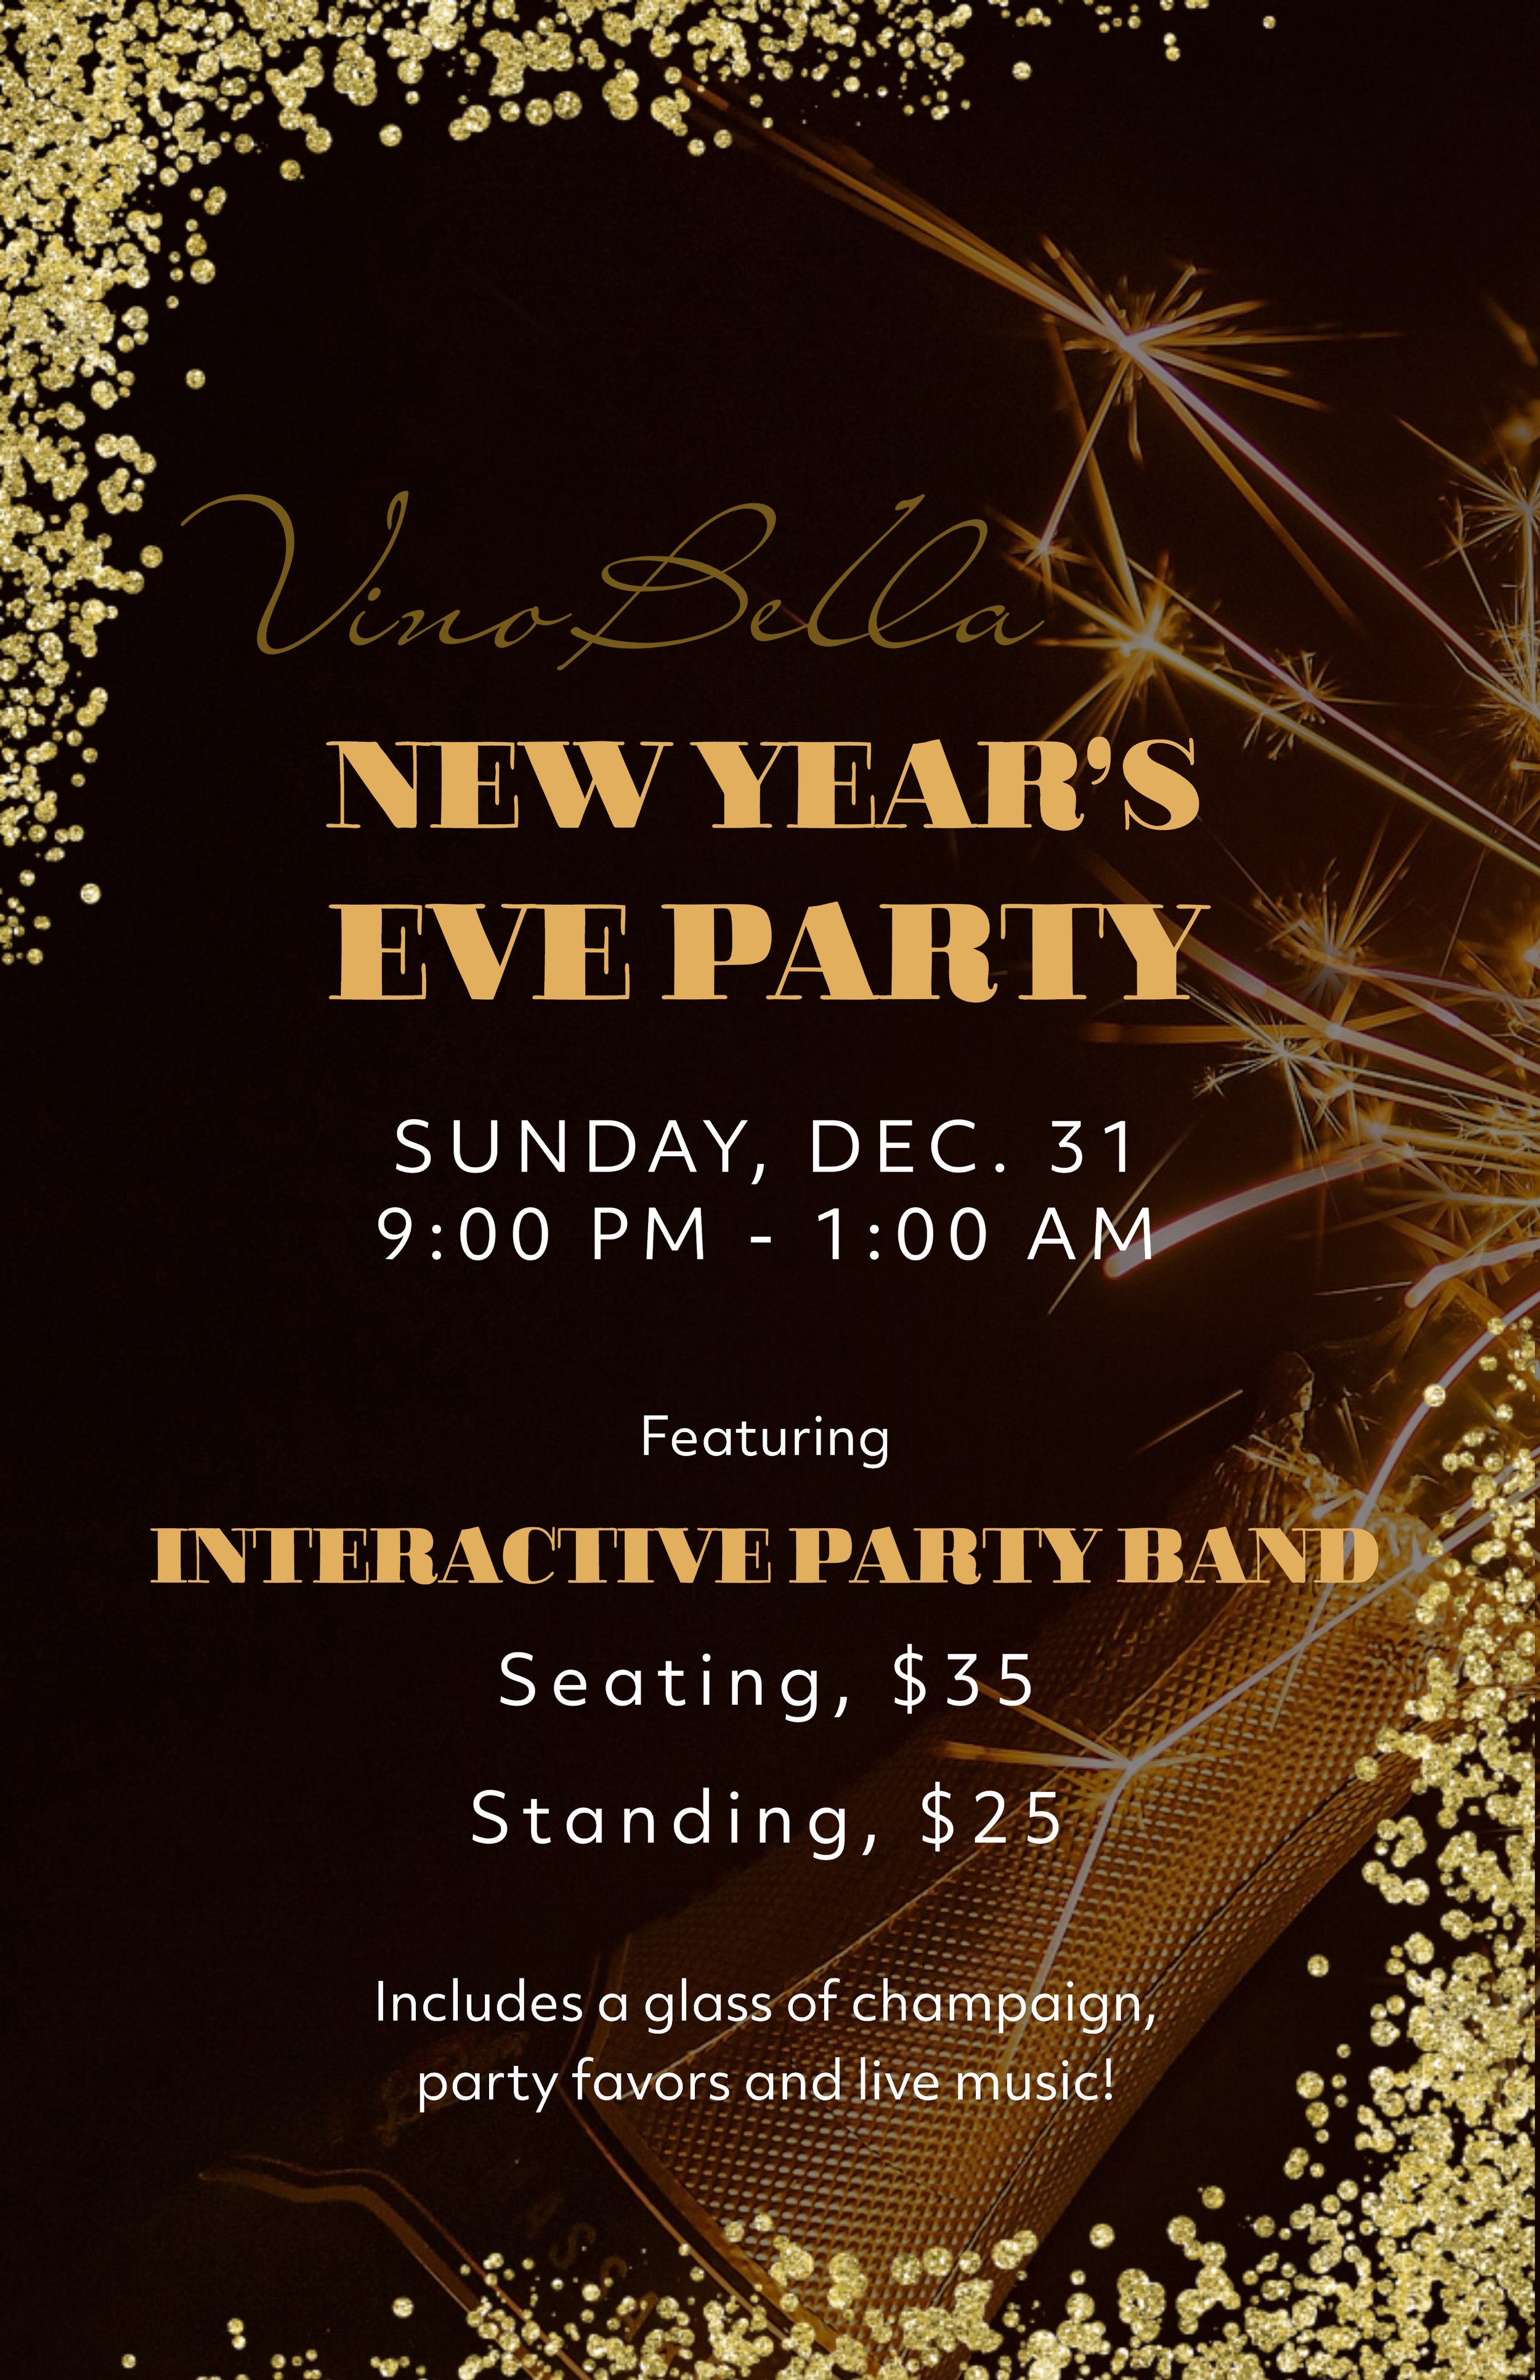 New Year’s Eve with Interactive Party Band — Vino Bella